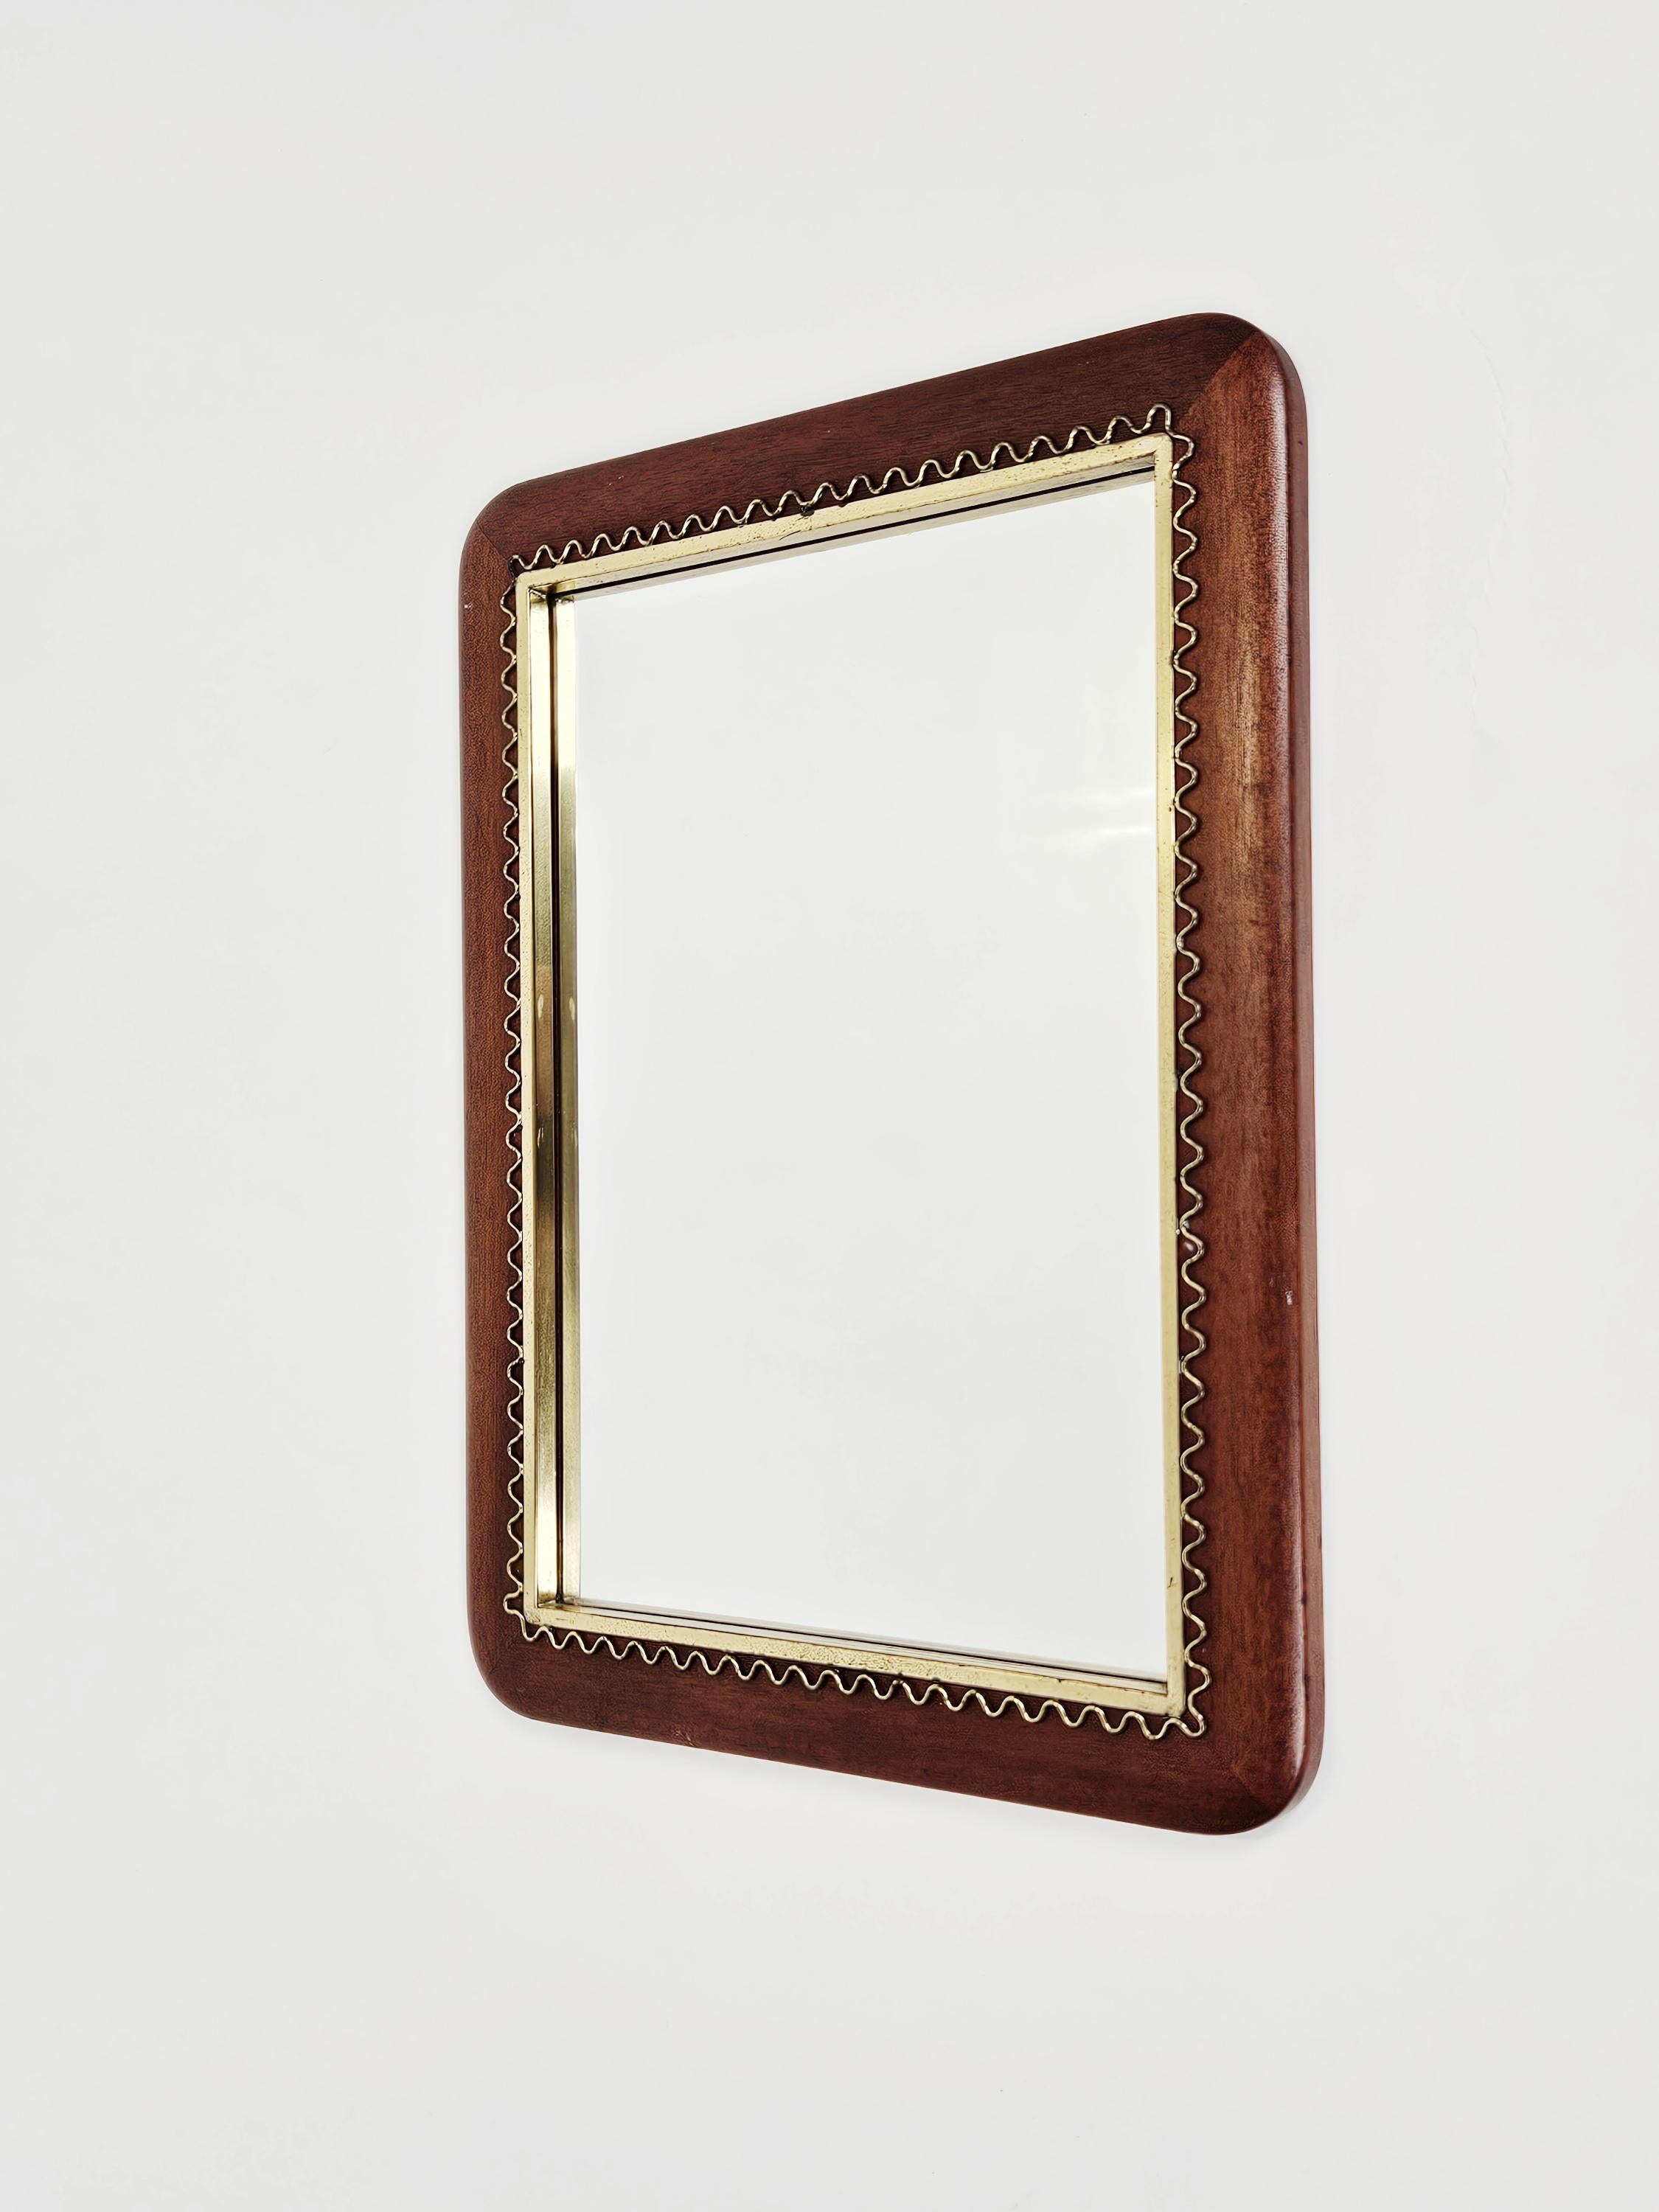 Wall mirror attributed to Josef Frank and Firma Svenskt Tenn. Made in Sweden during the 1950s.

Made in mahogany and brass. 